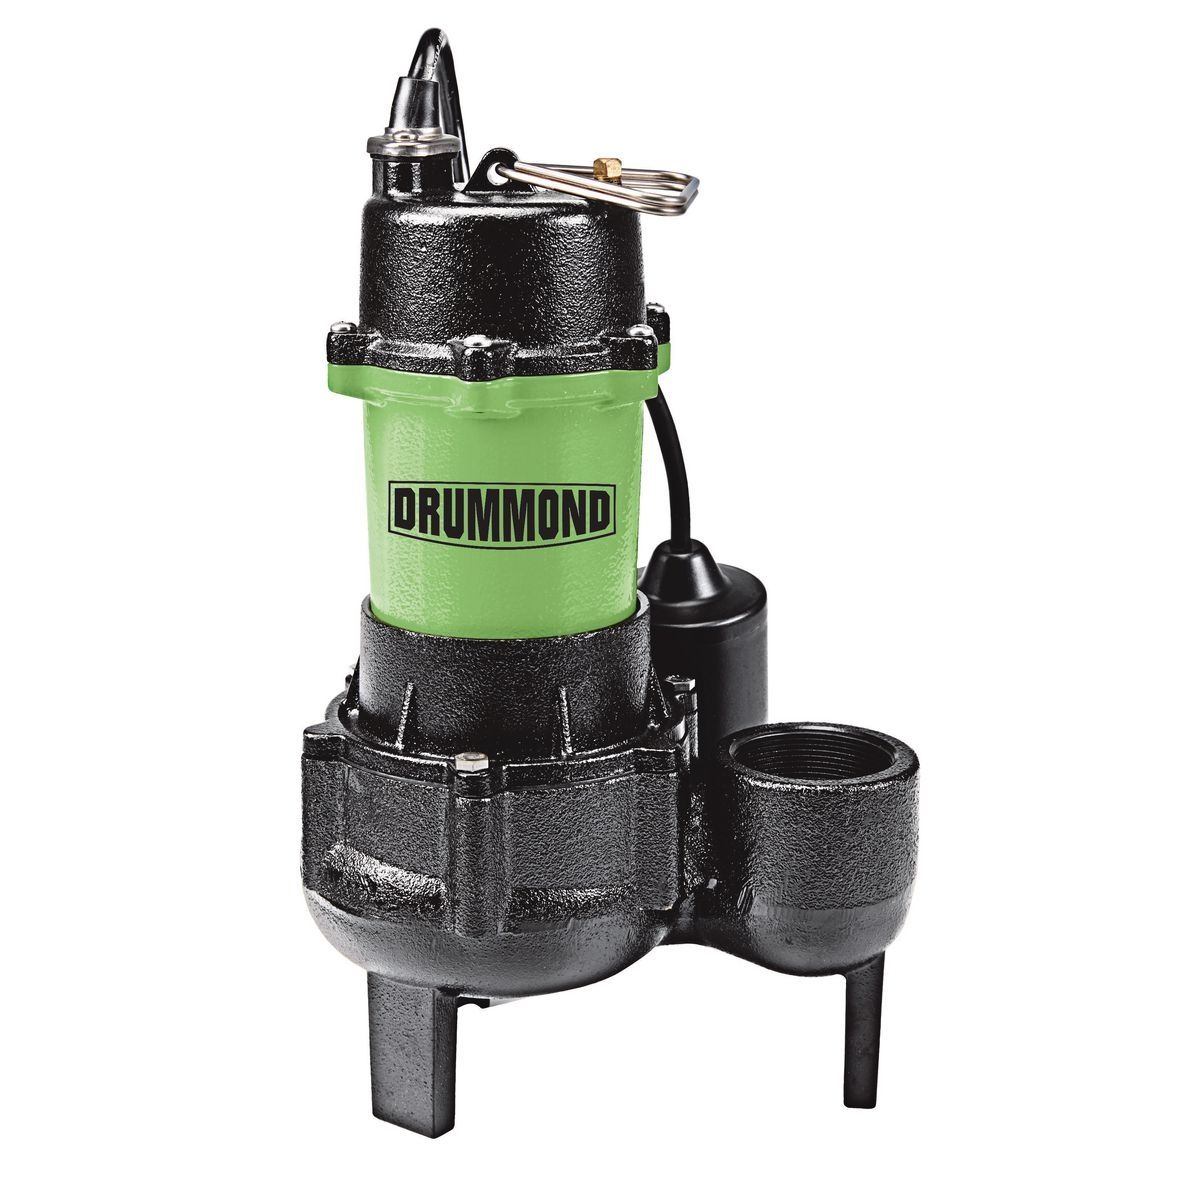 DRUMMOND 1/2 HP Submersible Sewage Pump with Tether Switch